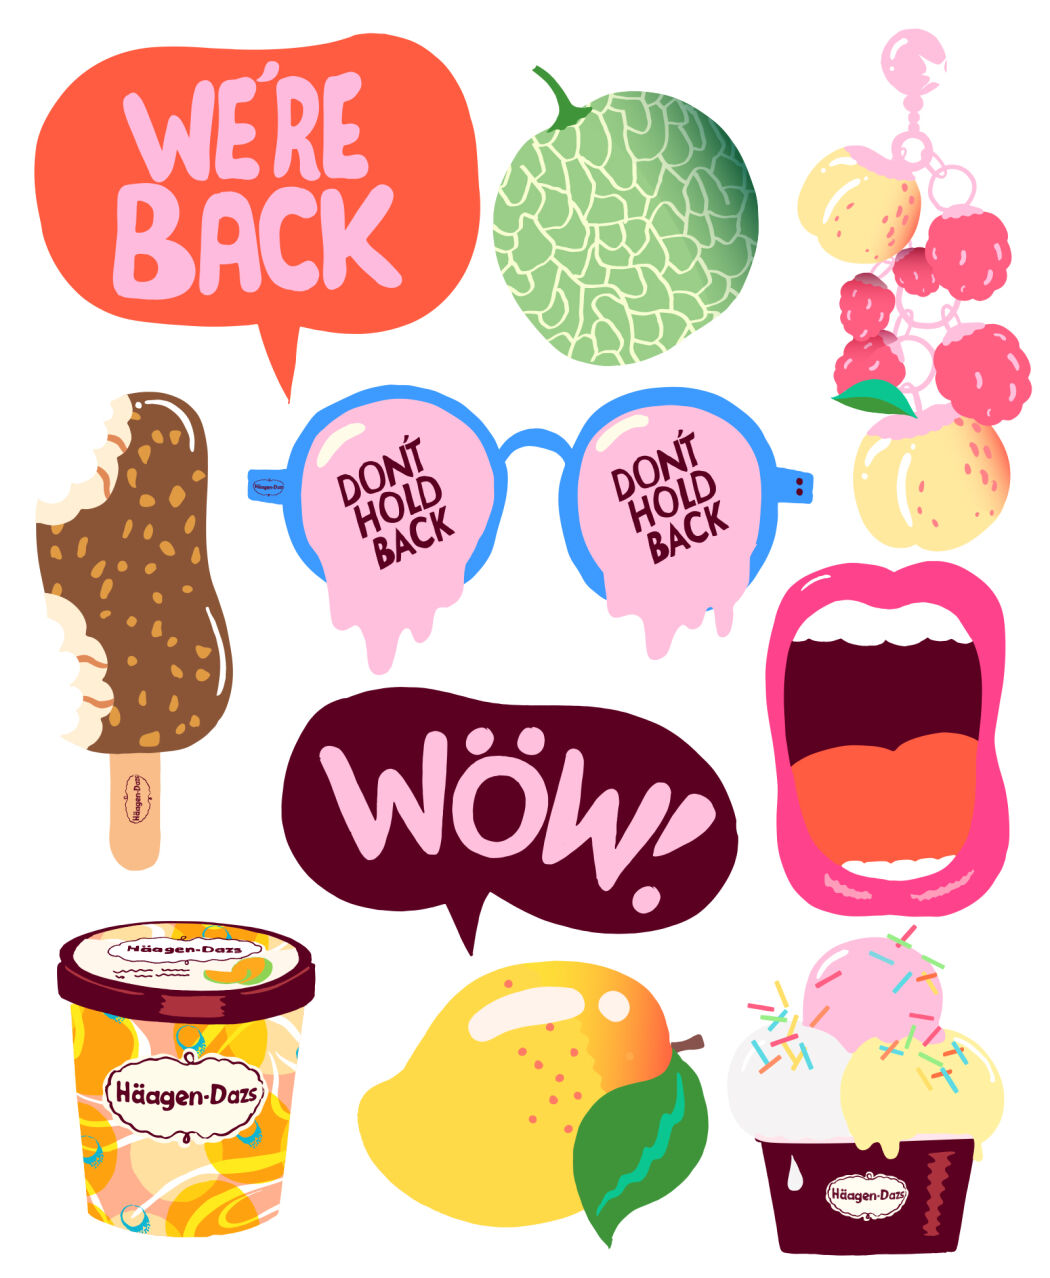 Branding and packaging illustrations by Erica Jacobson for Häagen-Dazs advertising campaign.